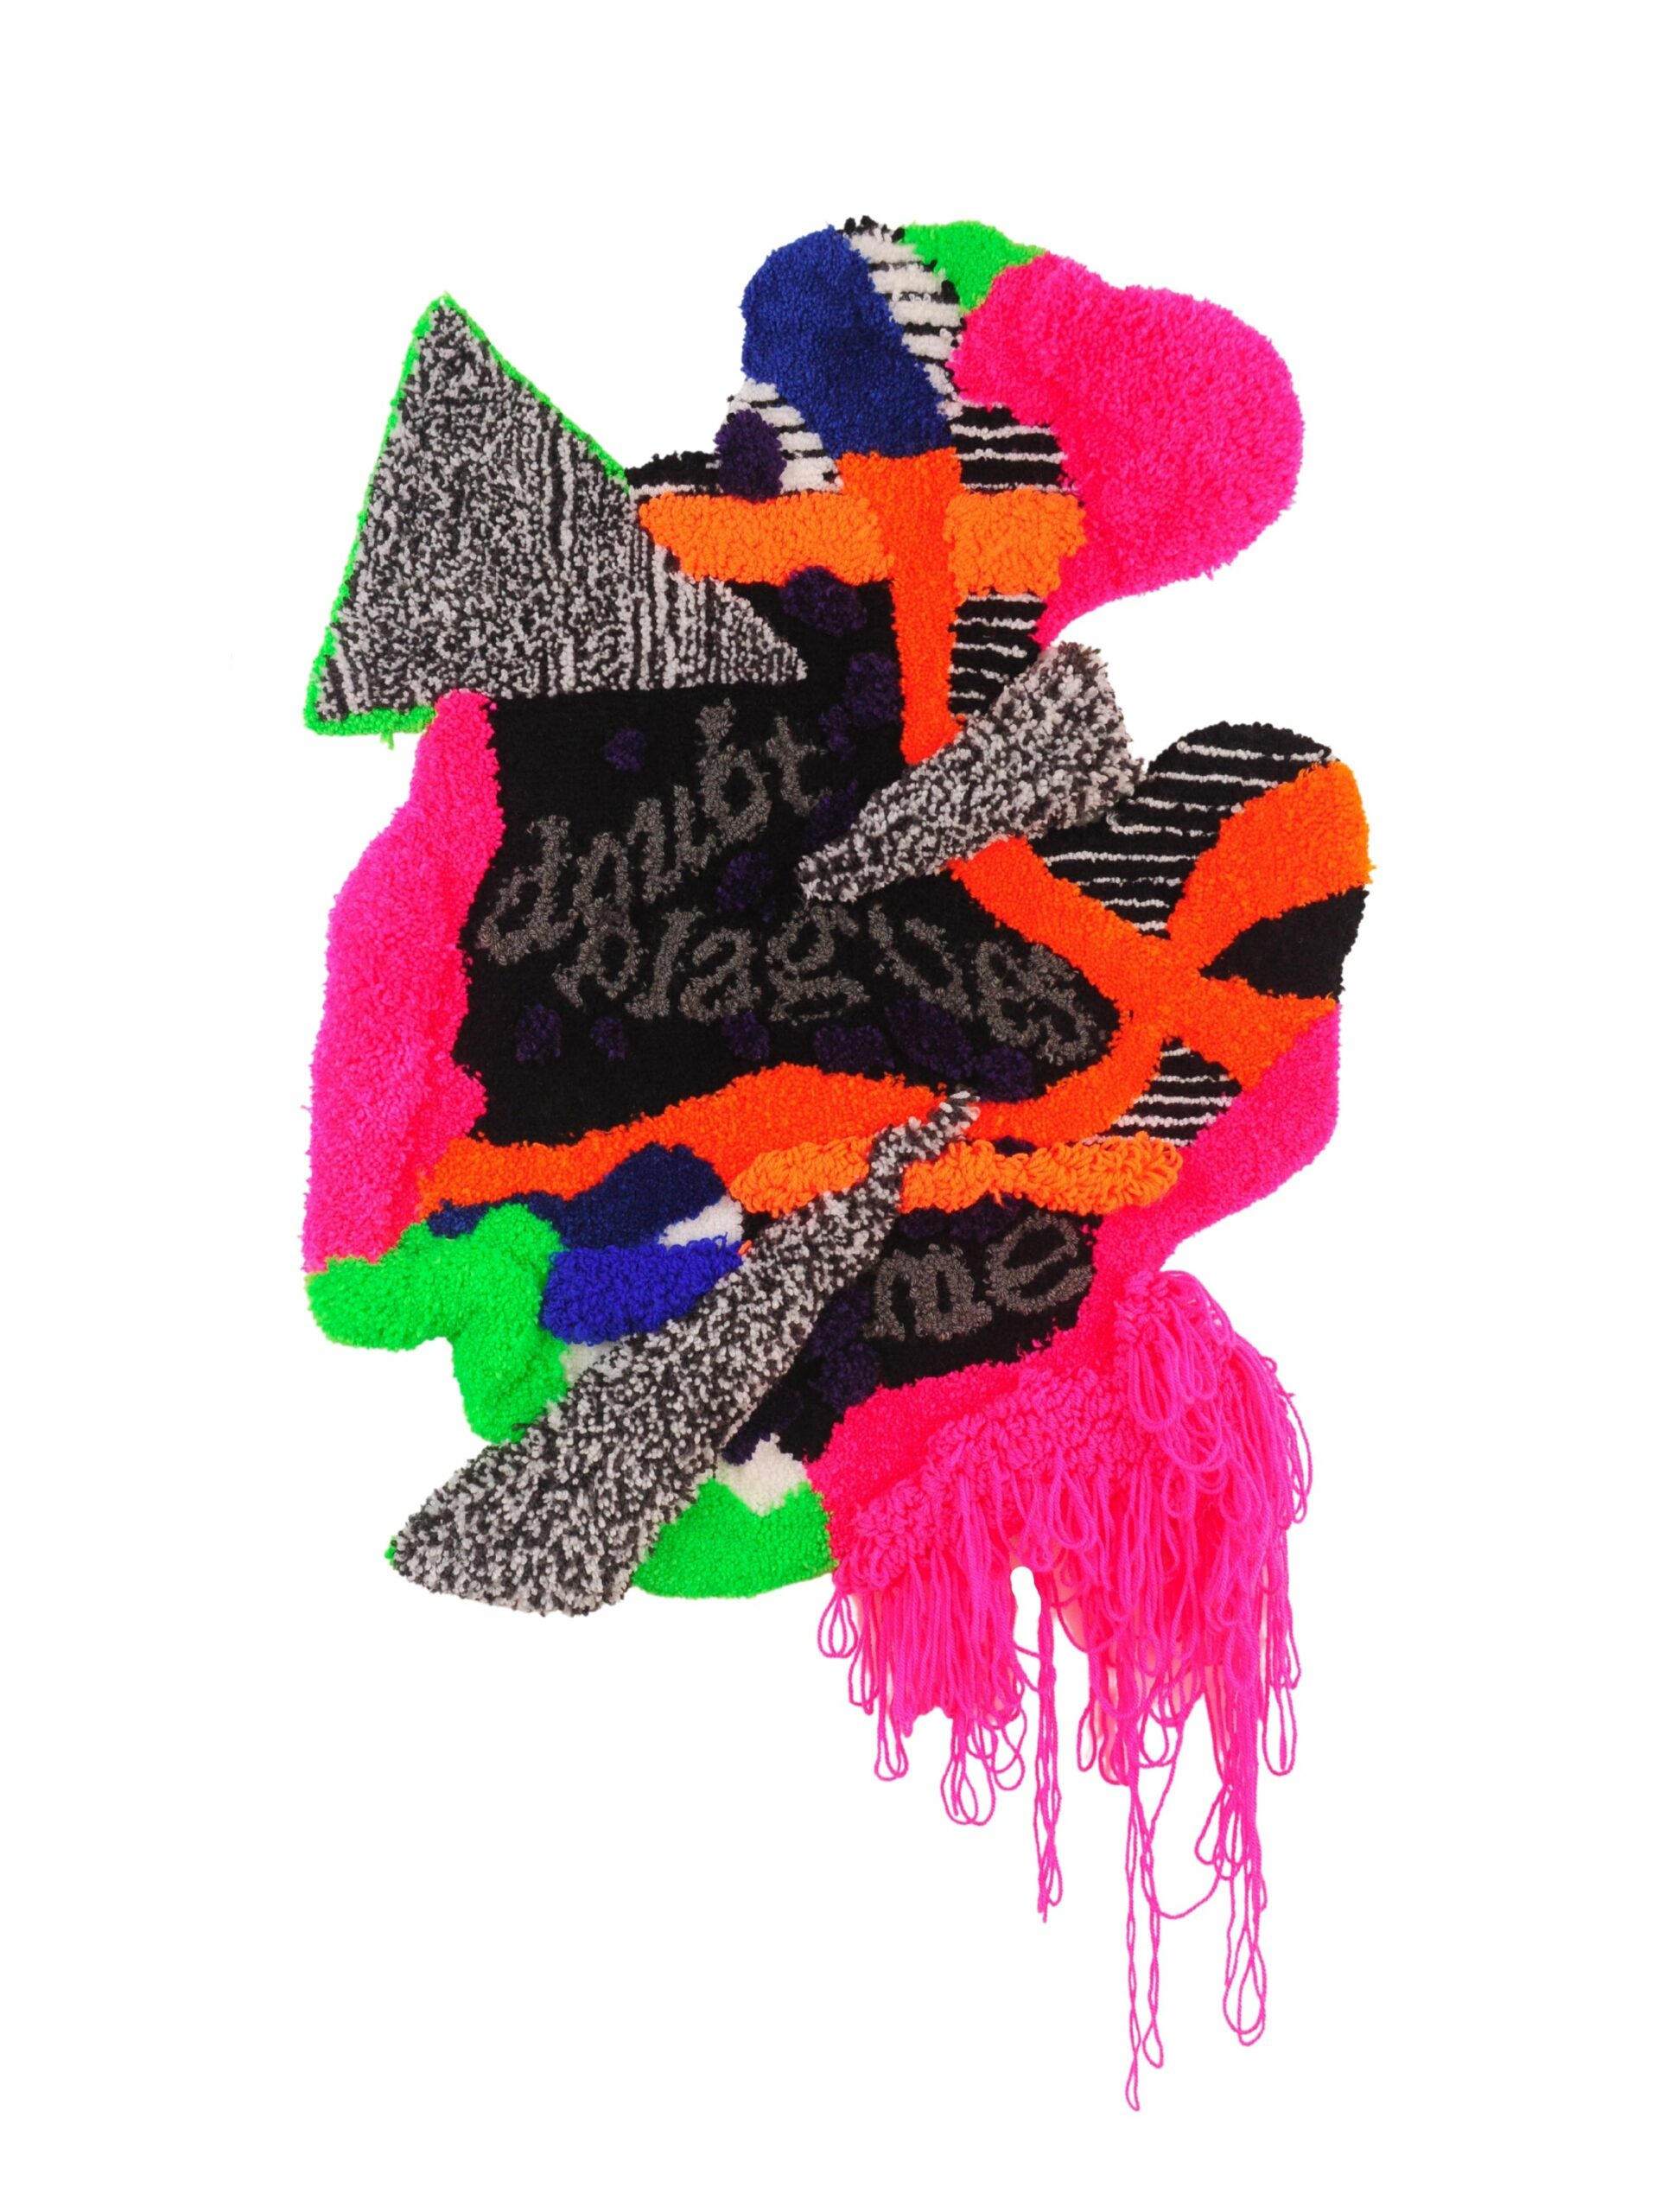 Fabric pieces glued together in abstract shapes in vibrant pink, blue, orange, green, black and gray with text